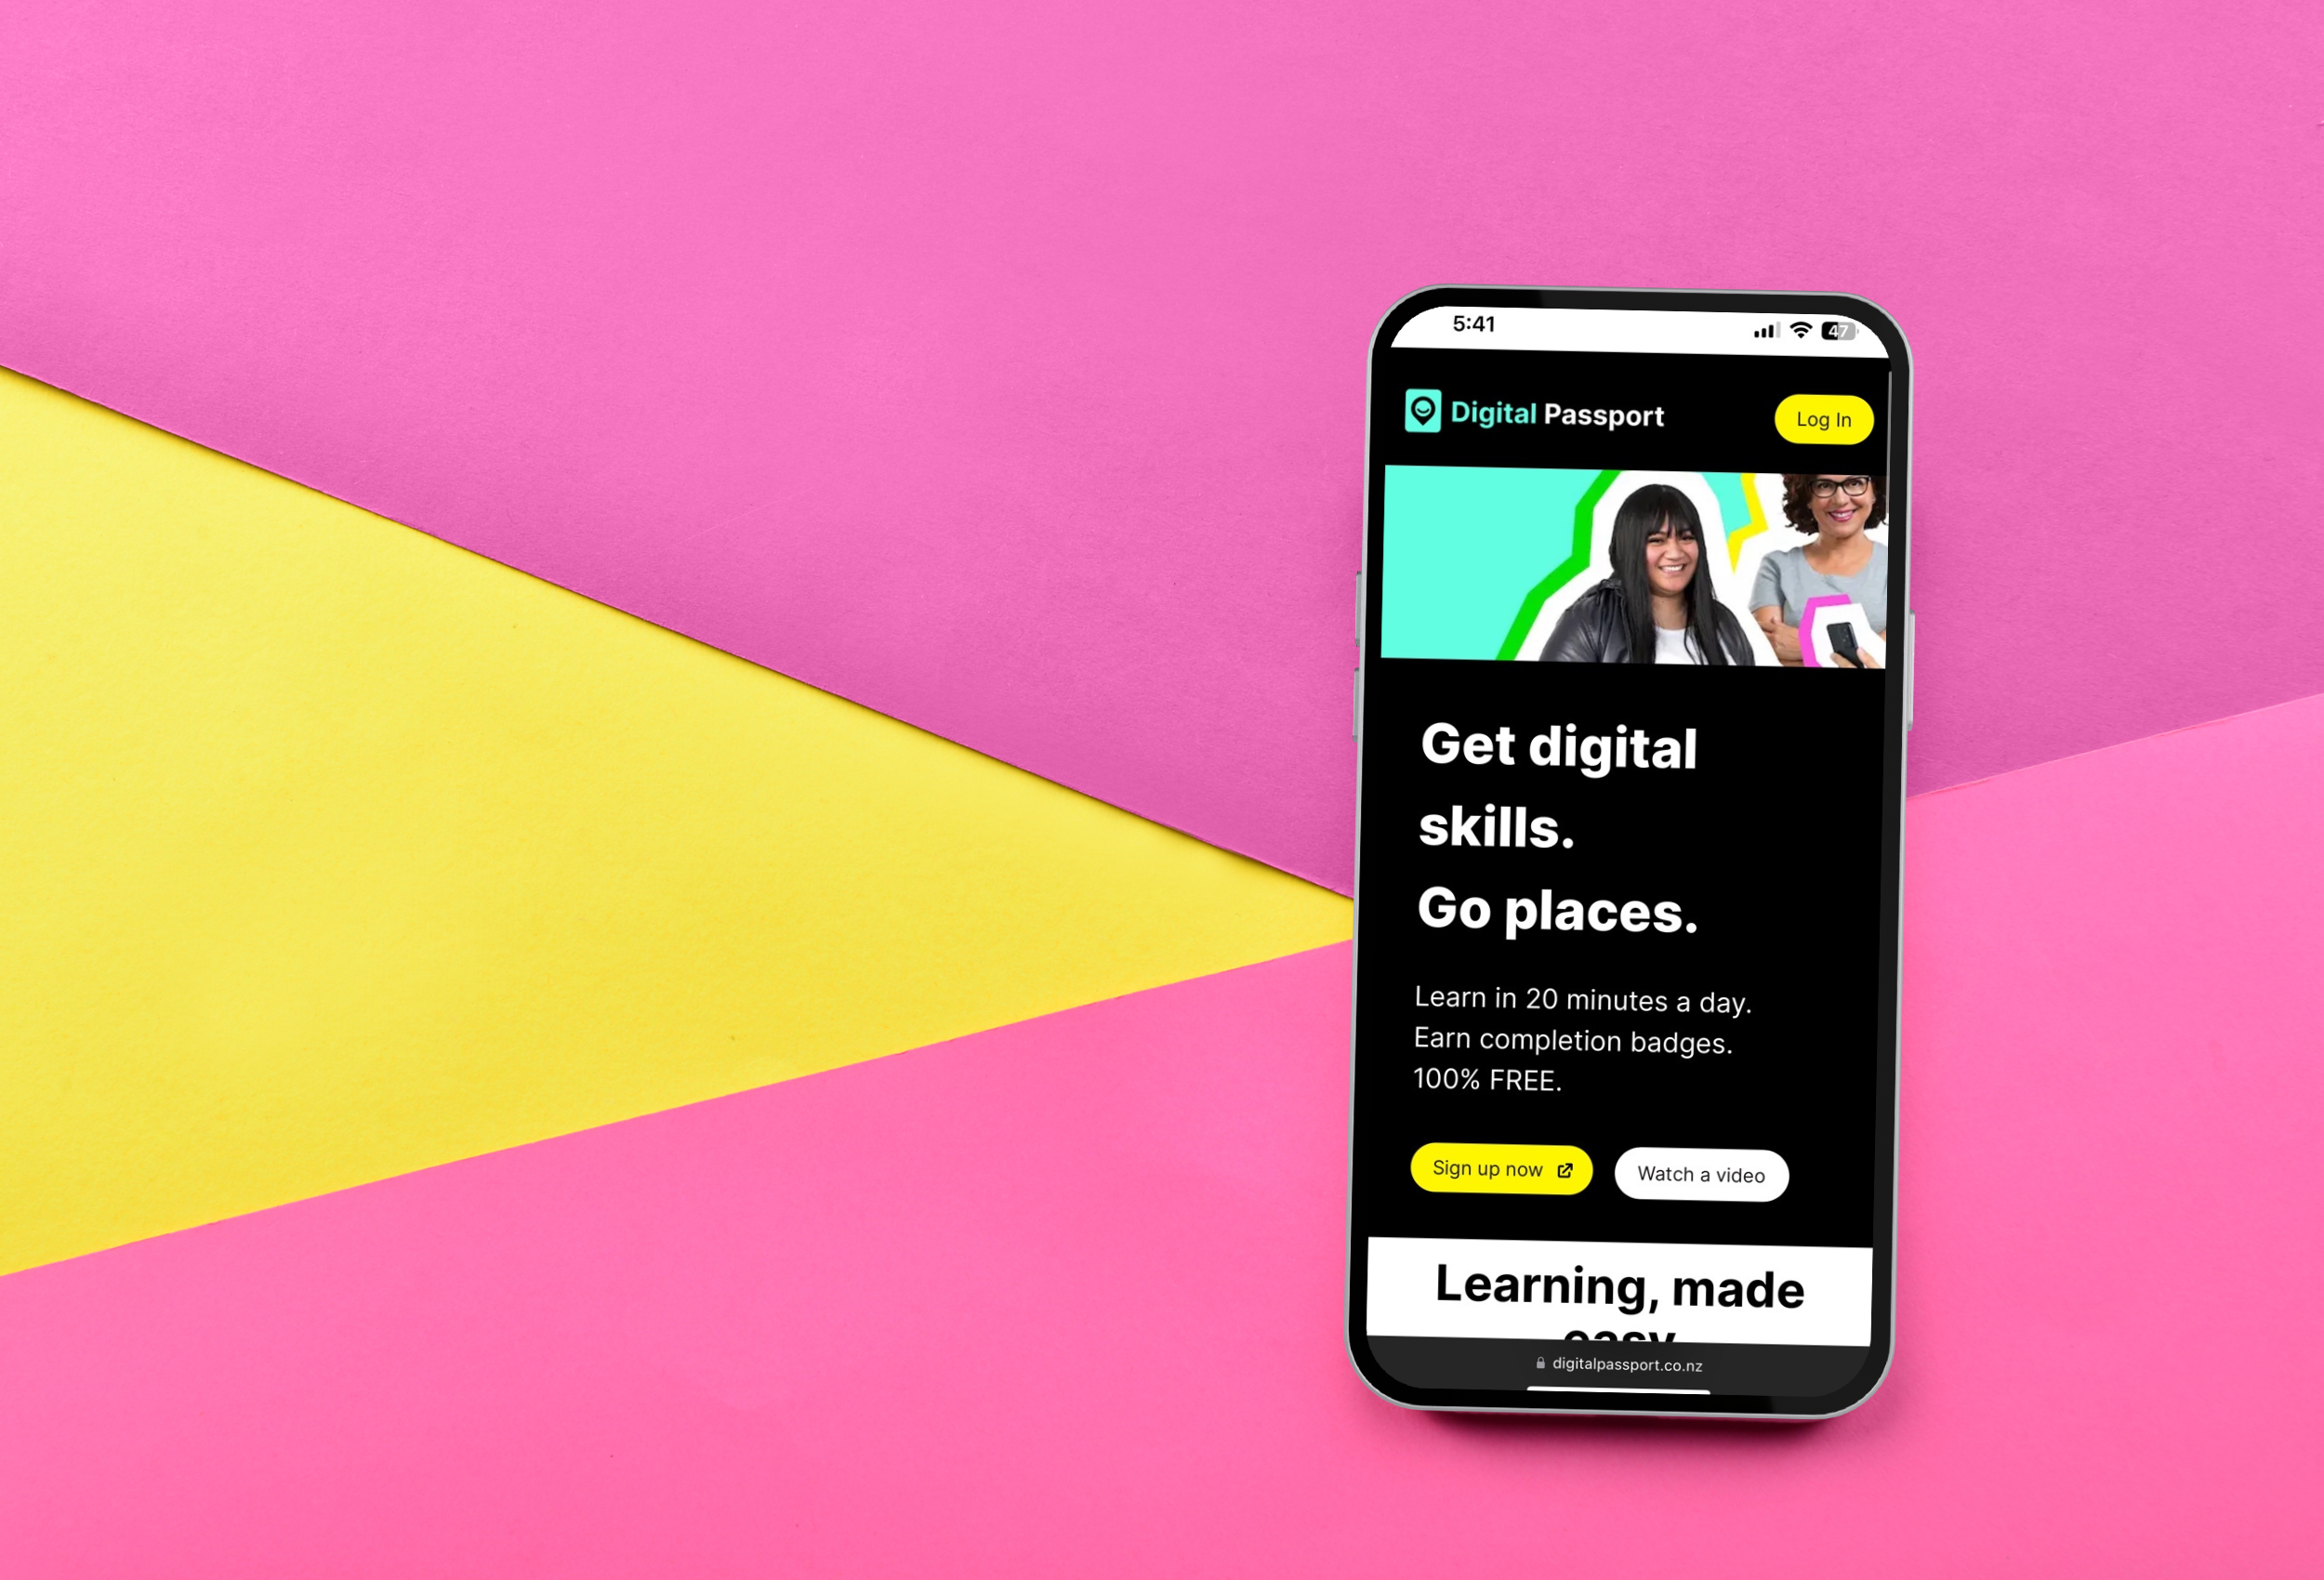 Phone in front of a pink and yellow background. Phone screen is showing the Digital Passport homepage.